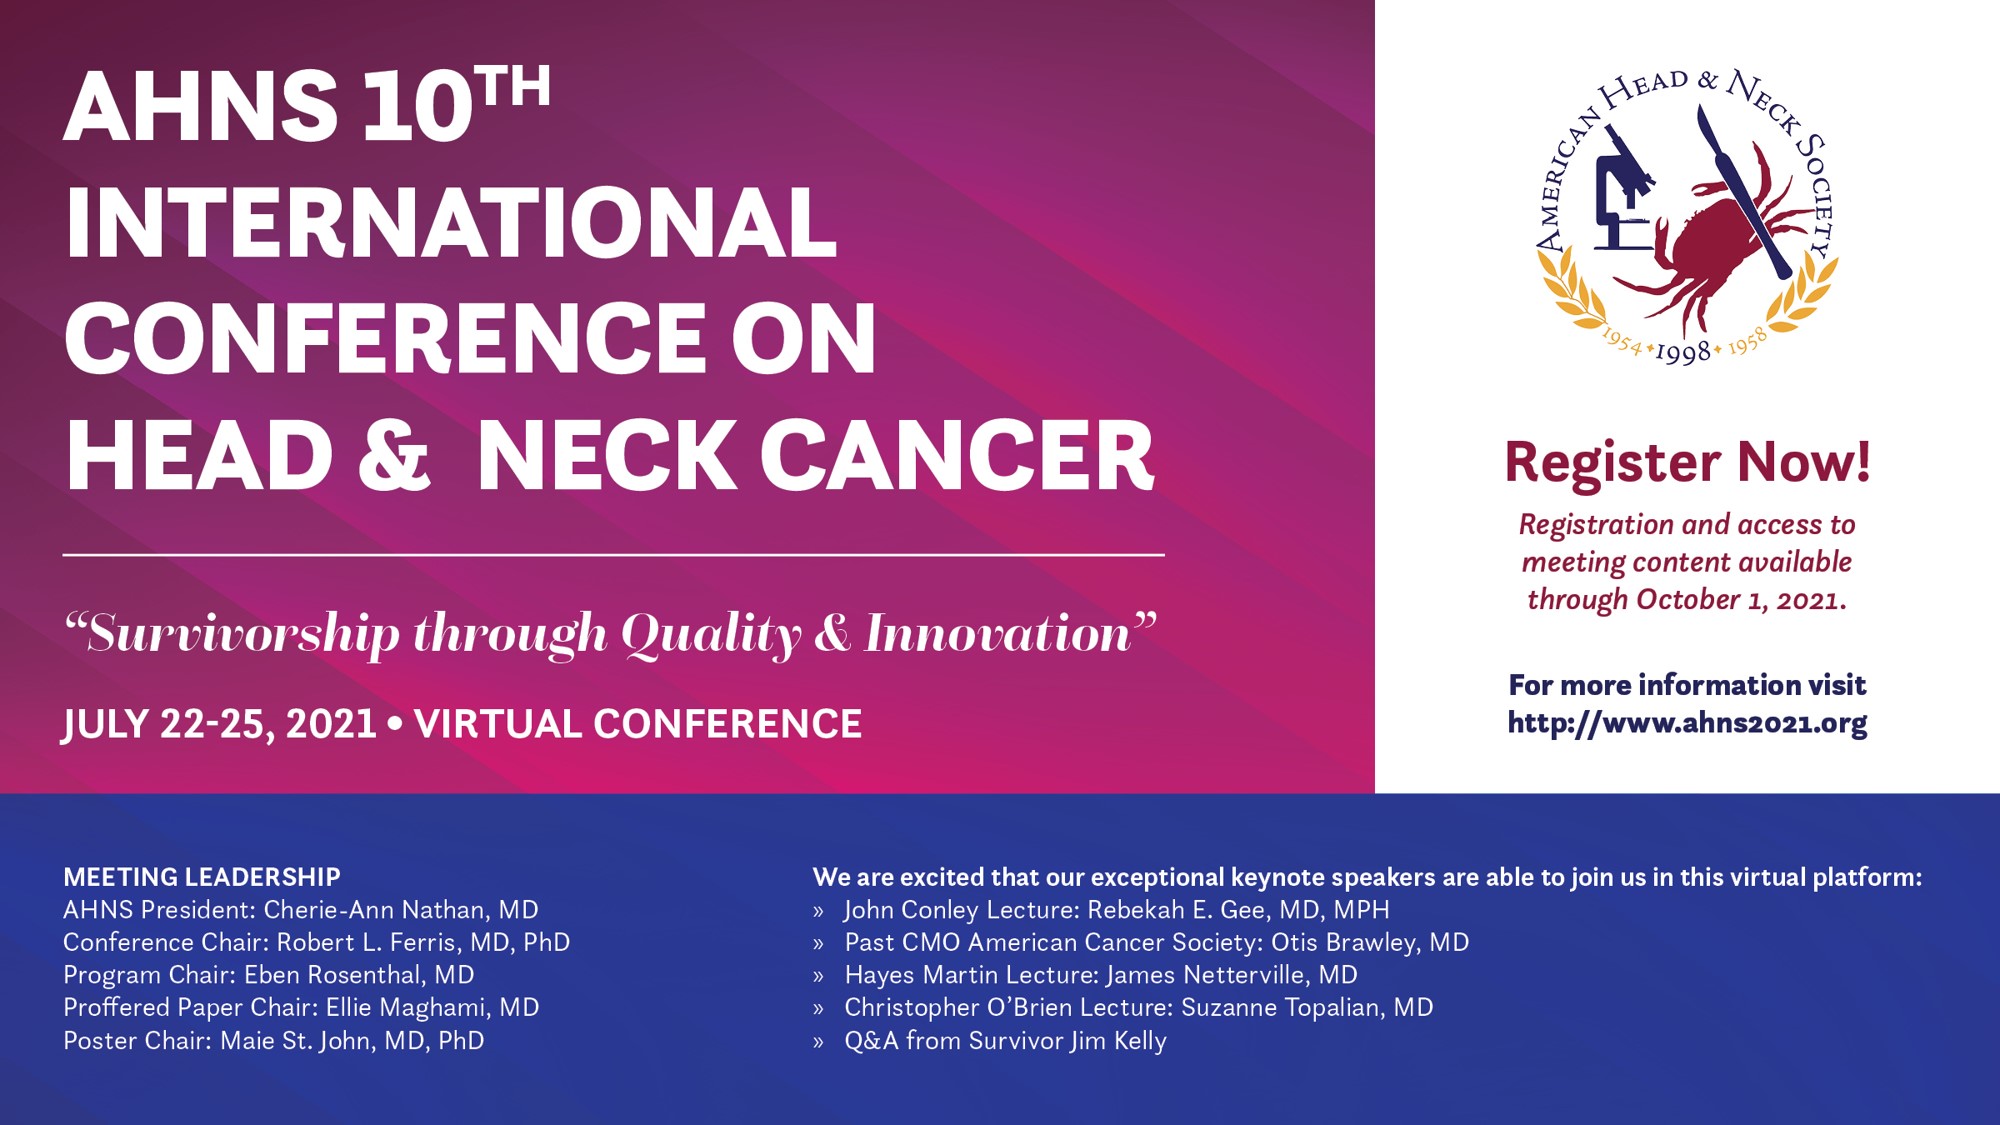 AHNS 10th International Conference on Head and Neck Cancer